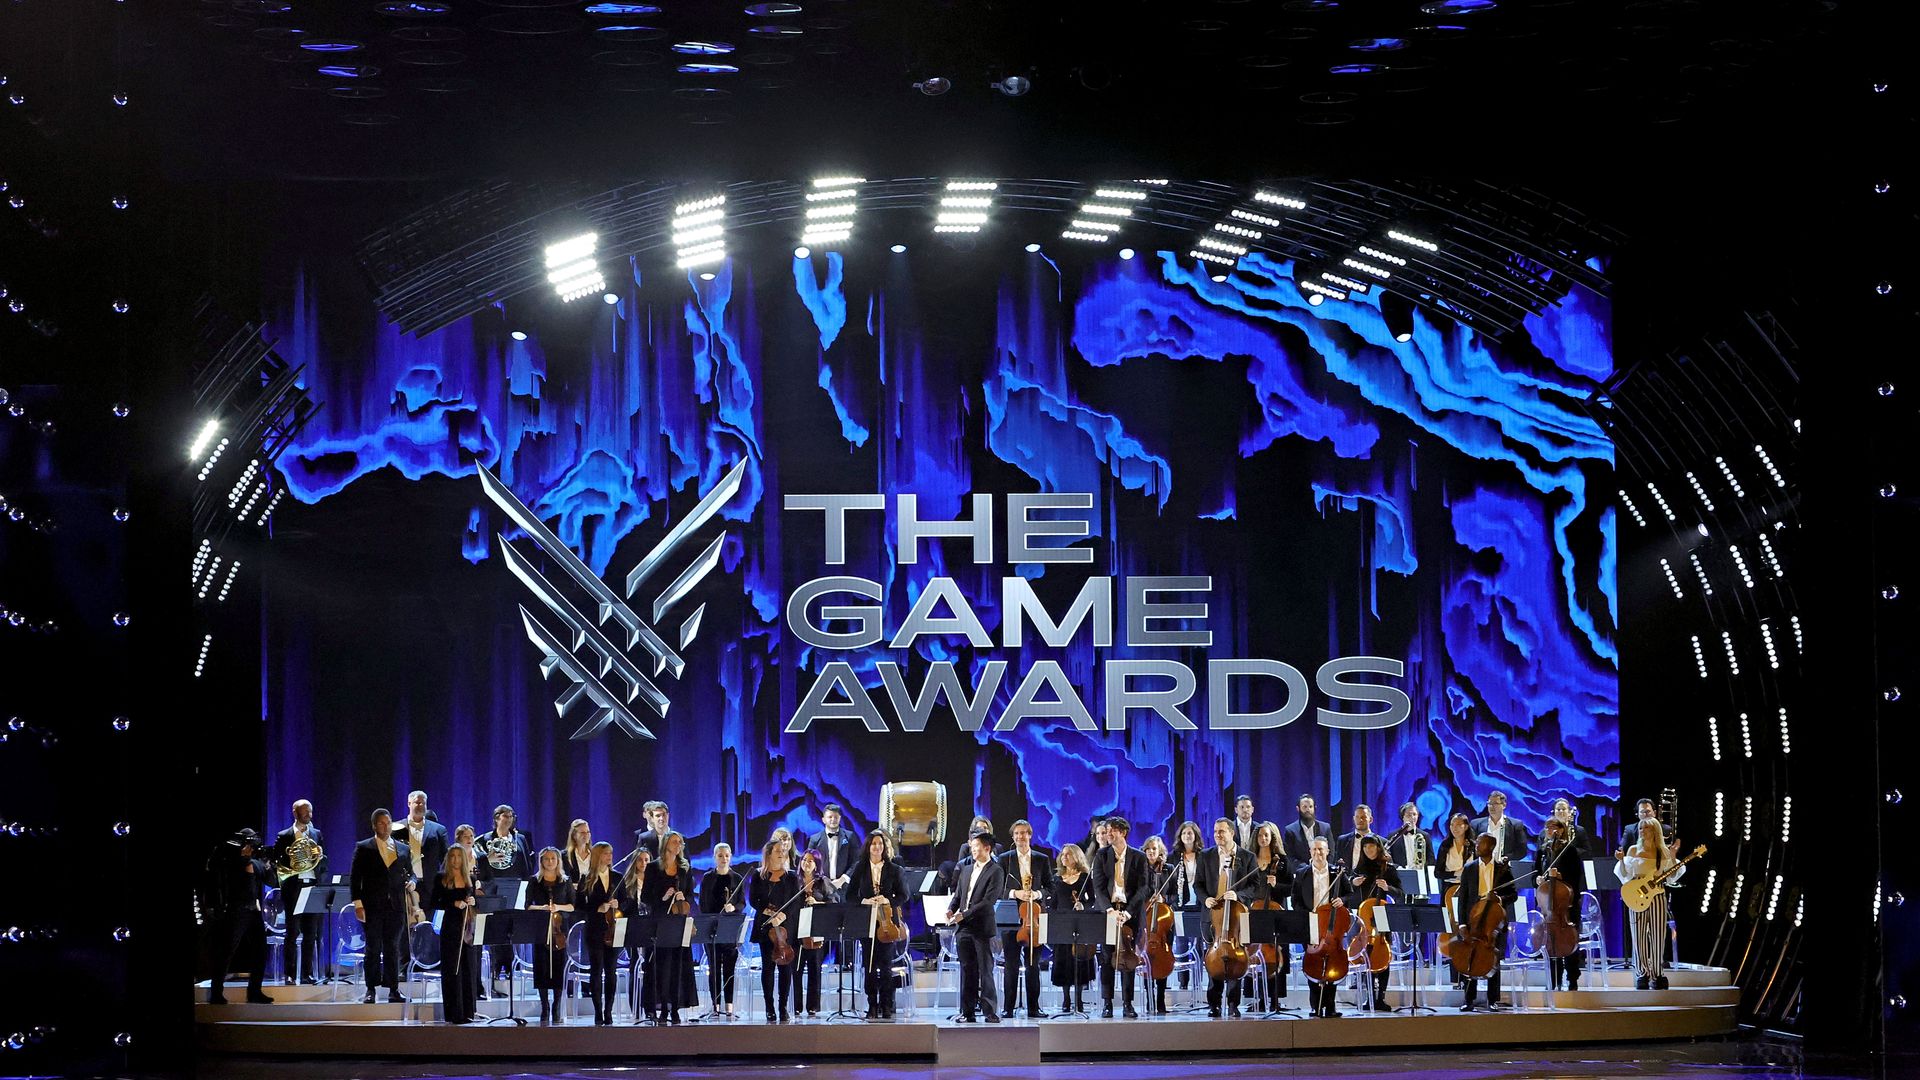 Photo of people on stage with a logo for The Game Awards in the background